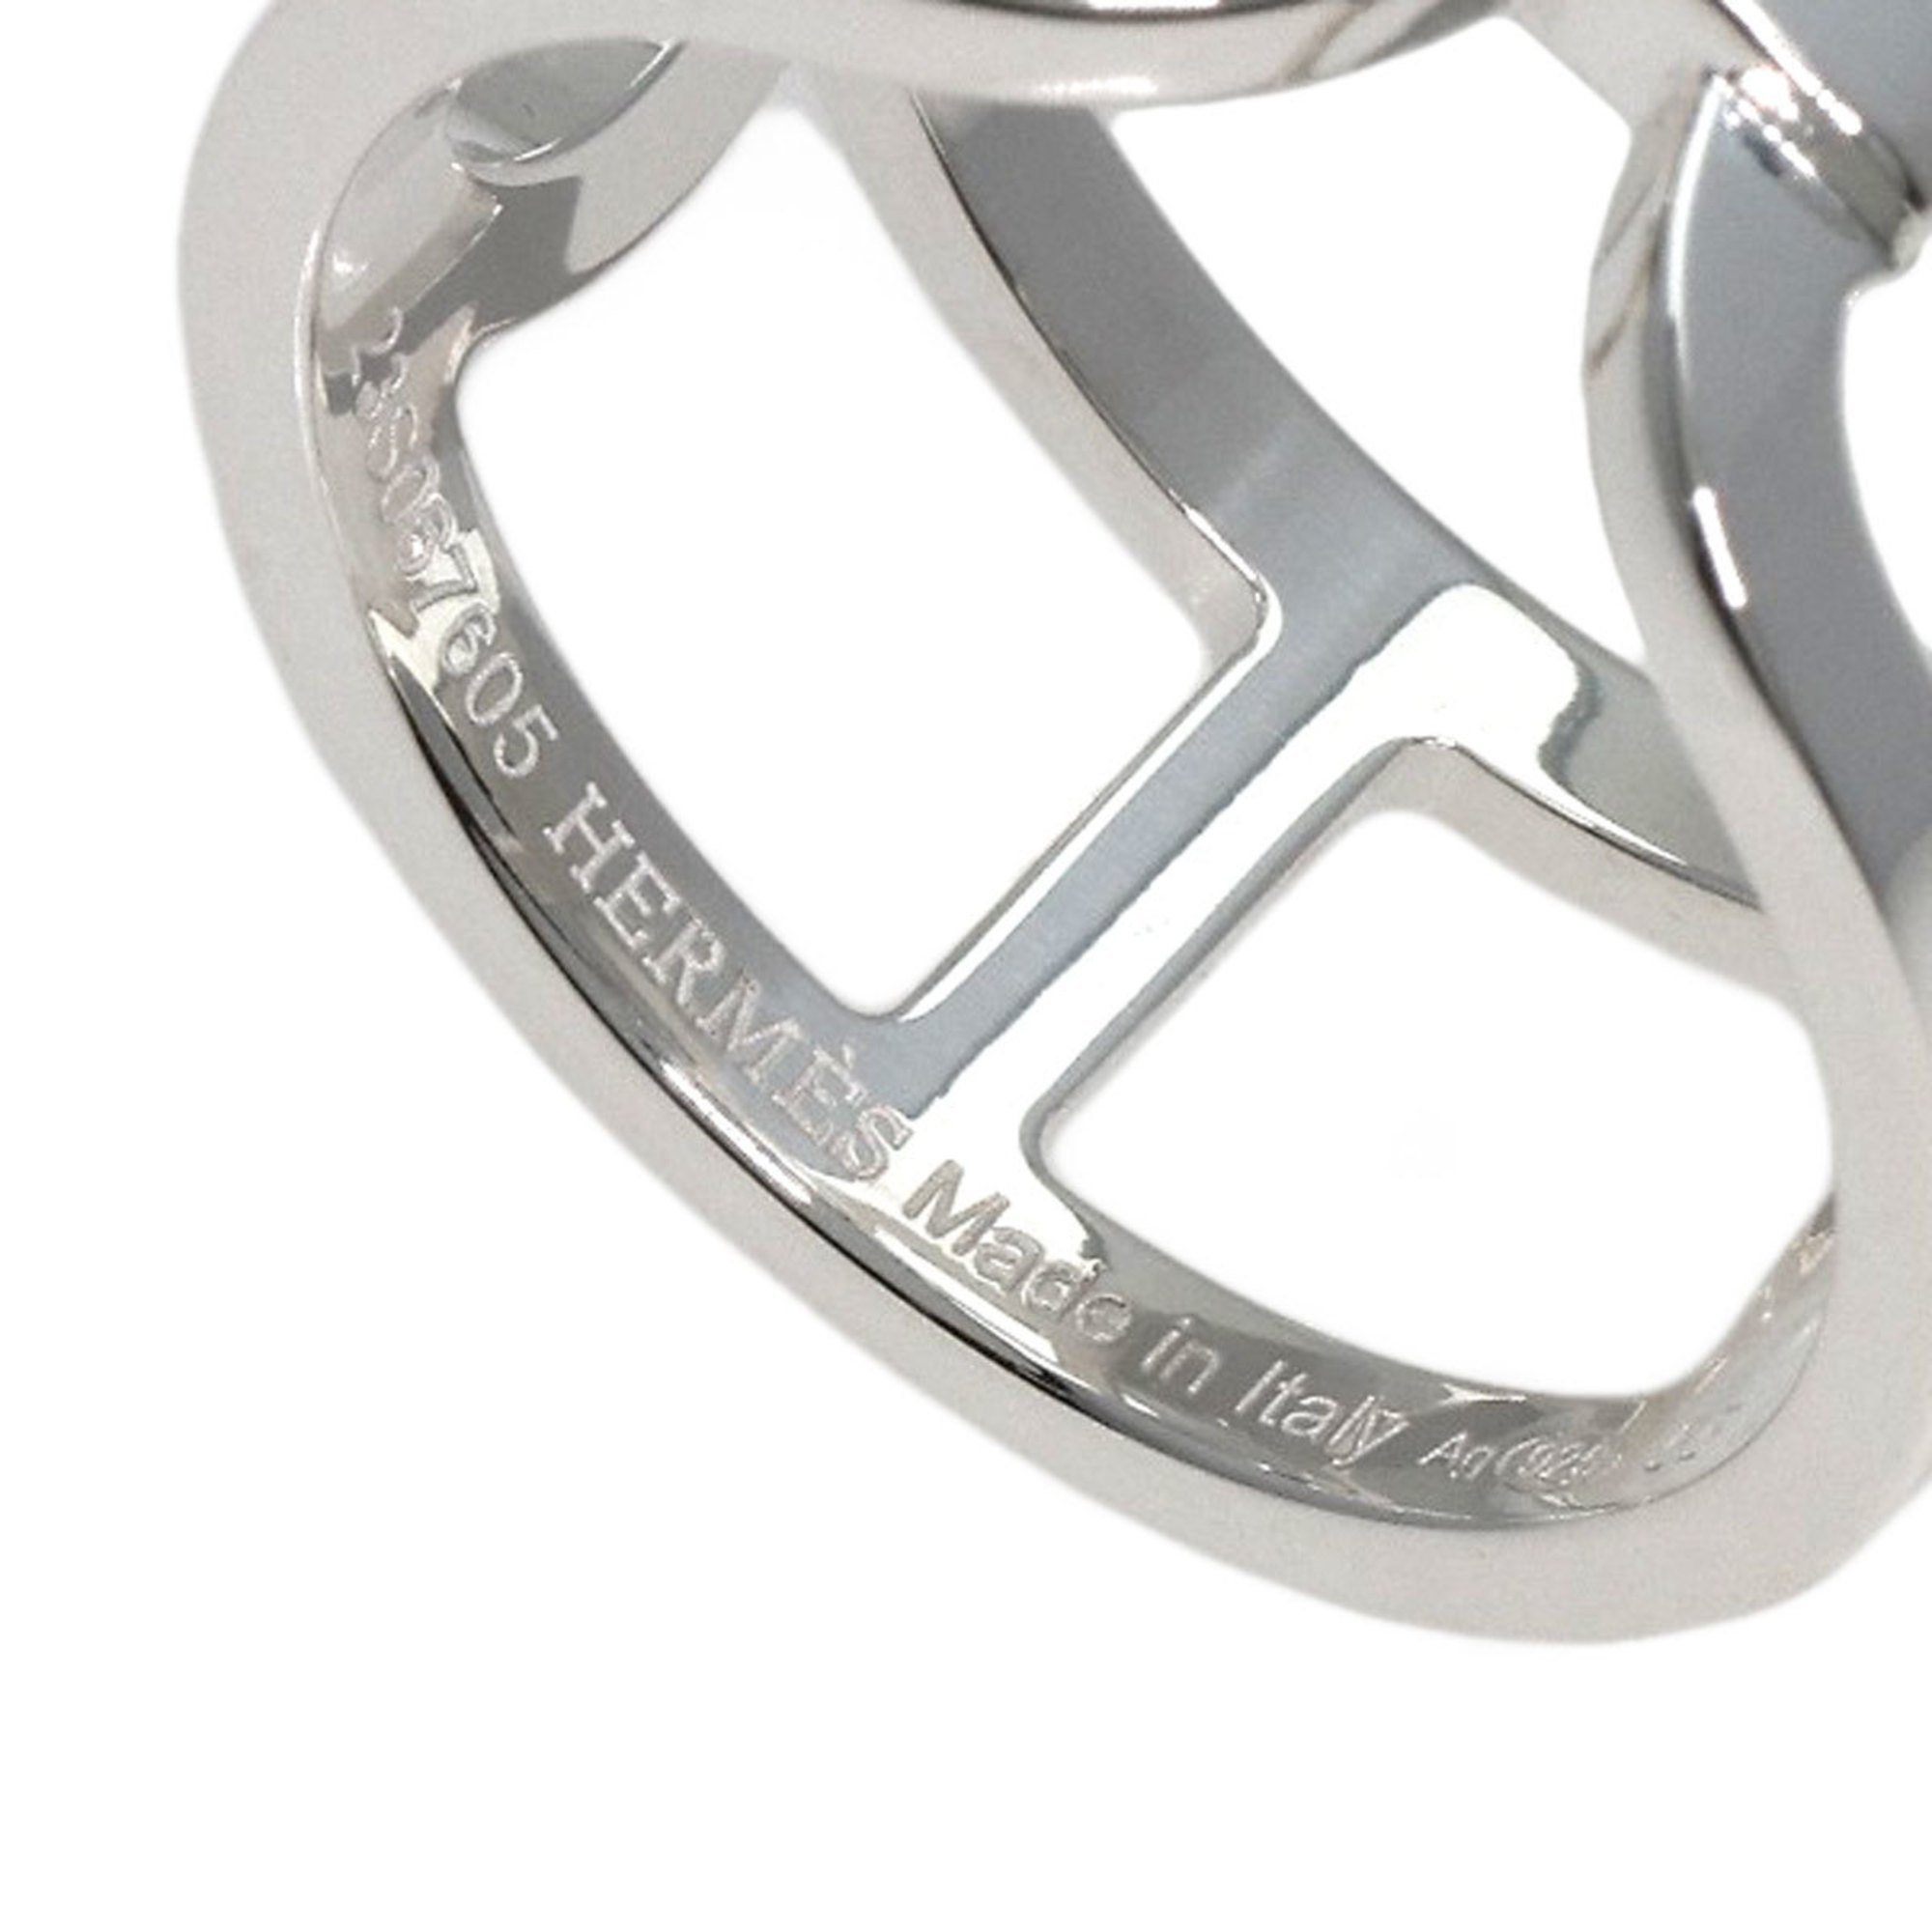 Hermes Ever Chaine d'Ancre MM #55 Ring, Silver, Women's